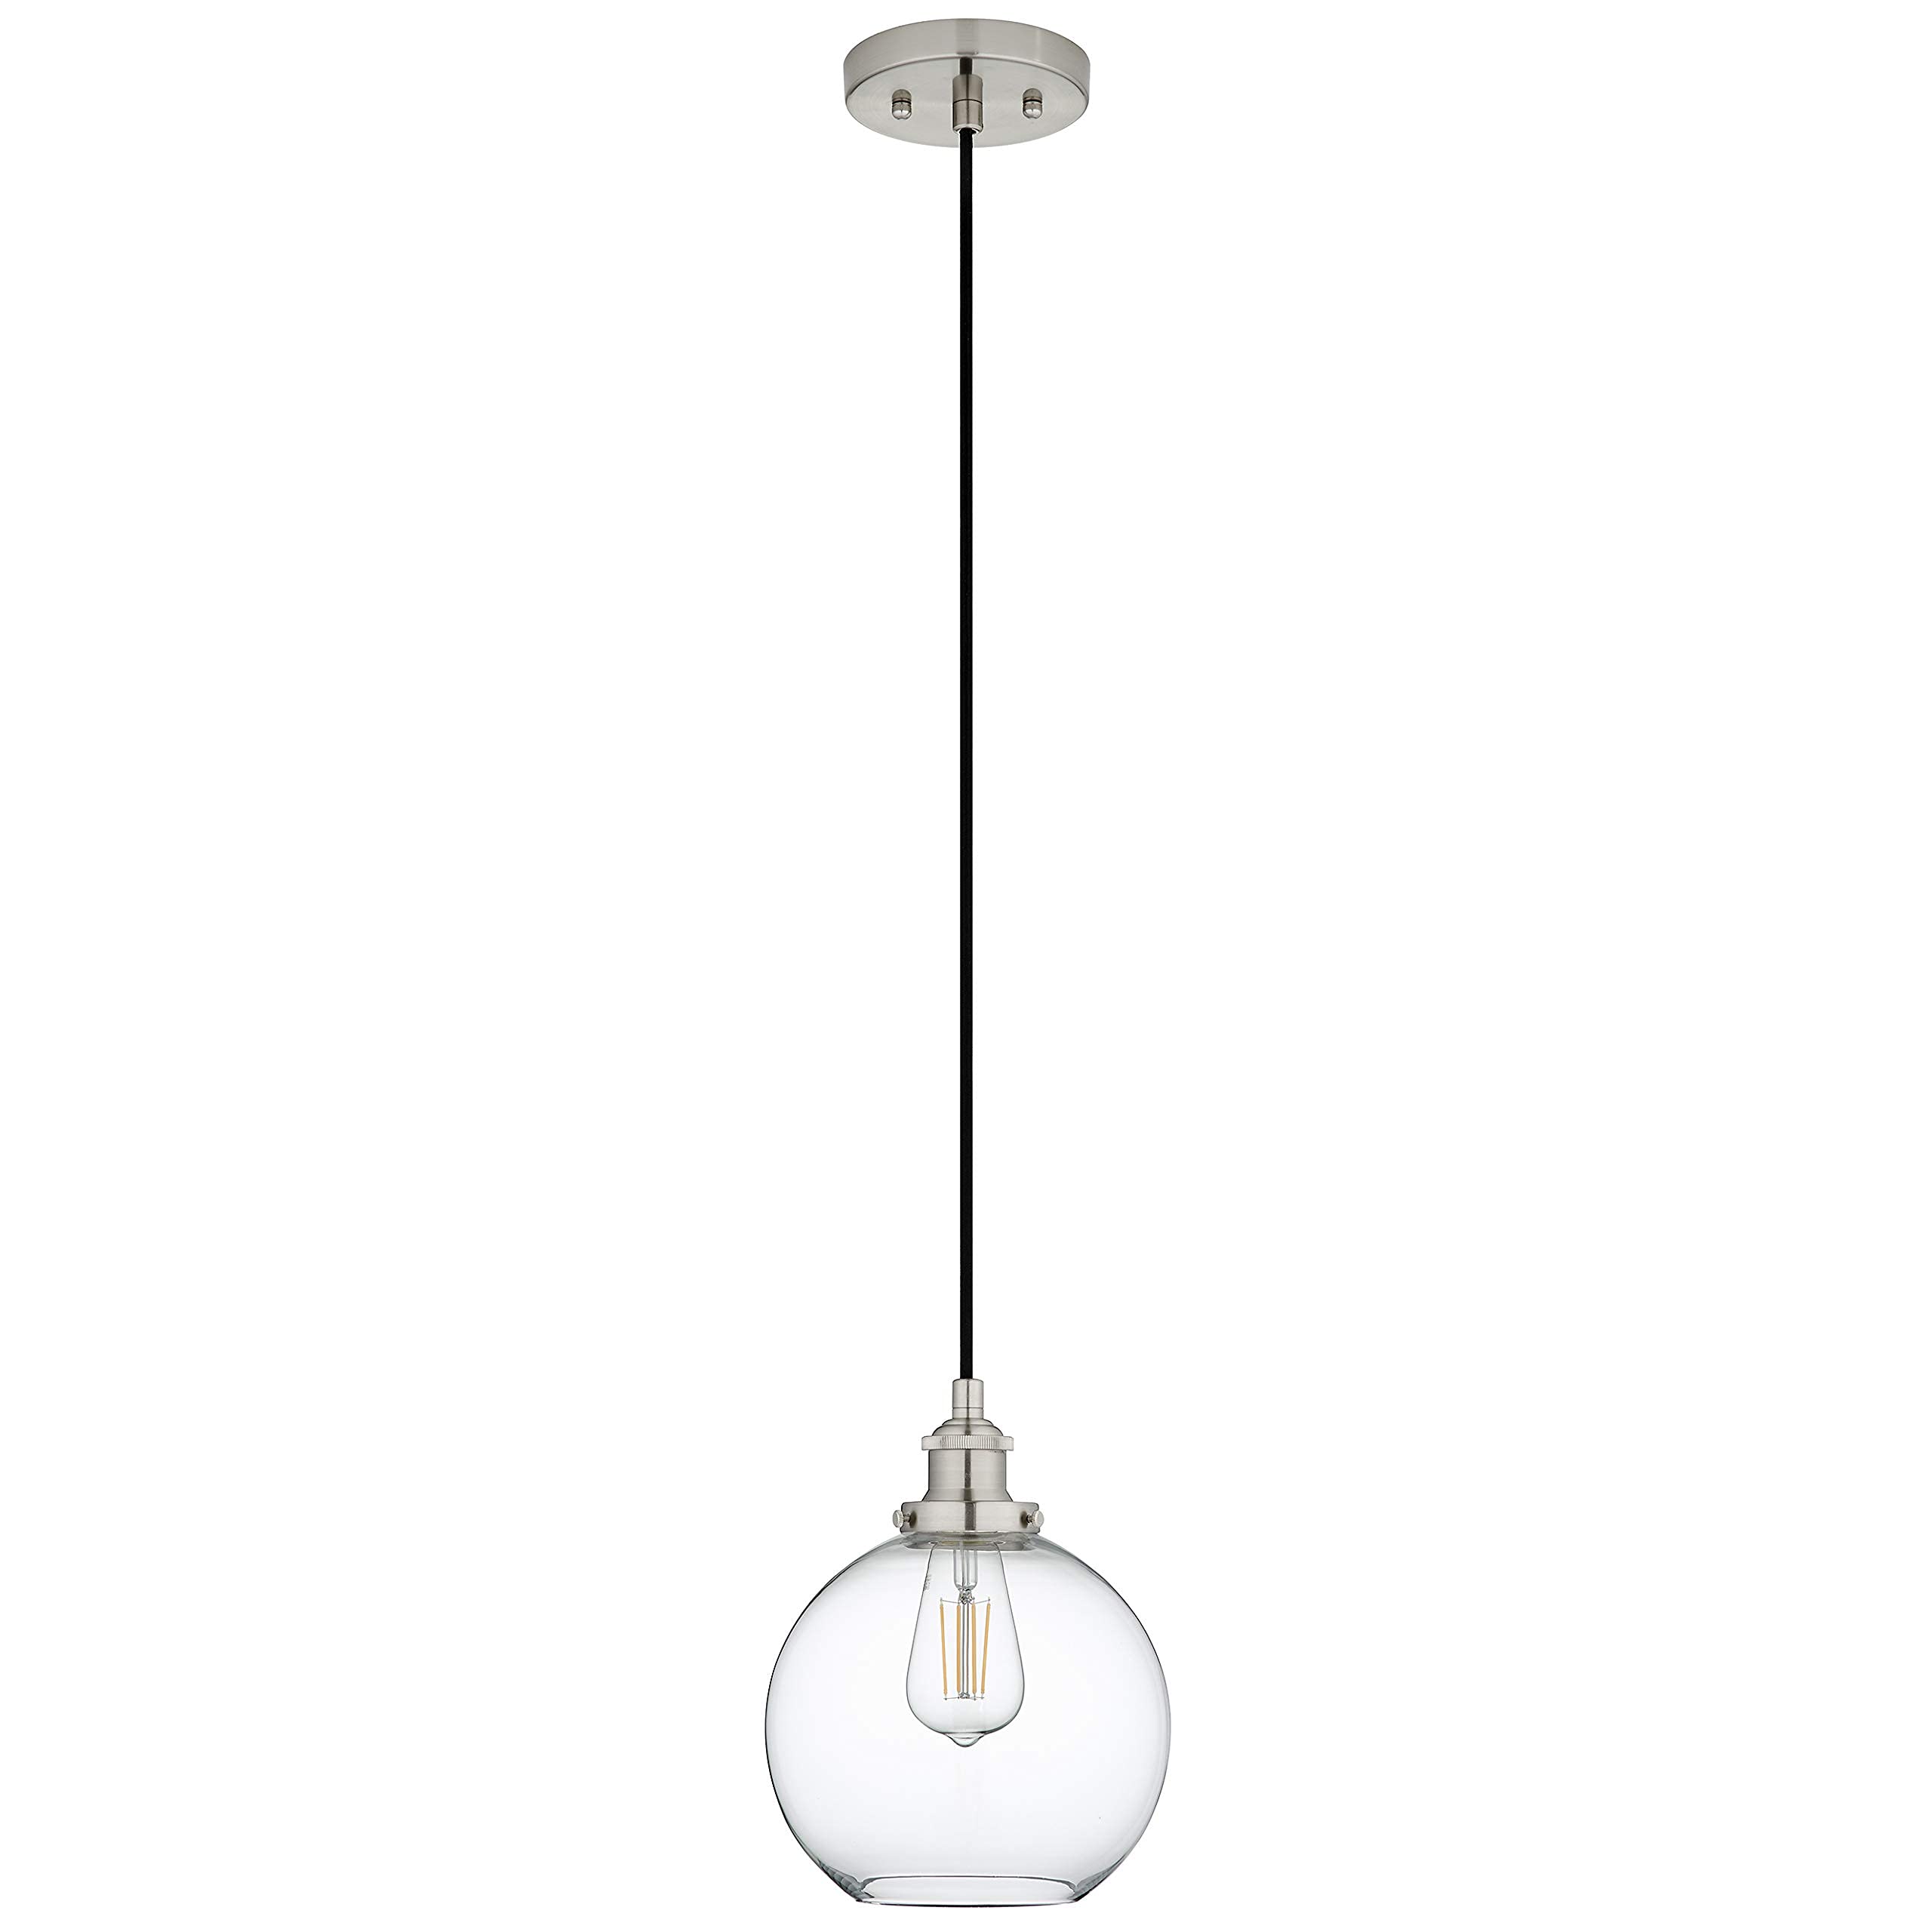 Linea di Liara Primo Large Brushed Nickel Glass Globe Pendant Light Fixture Farmhouse Pendant Lighting for Kitchen Island Mid Century Modern Ceiling Light Clear Glass Shade, UL Listed